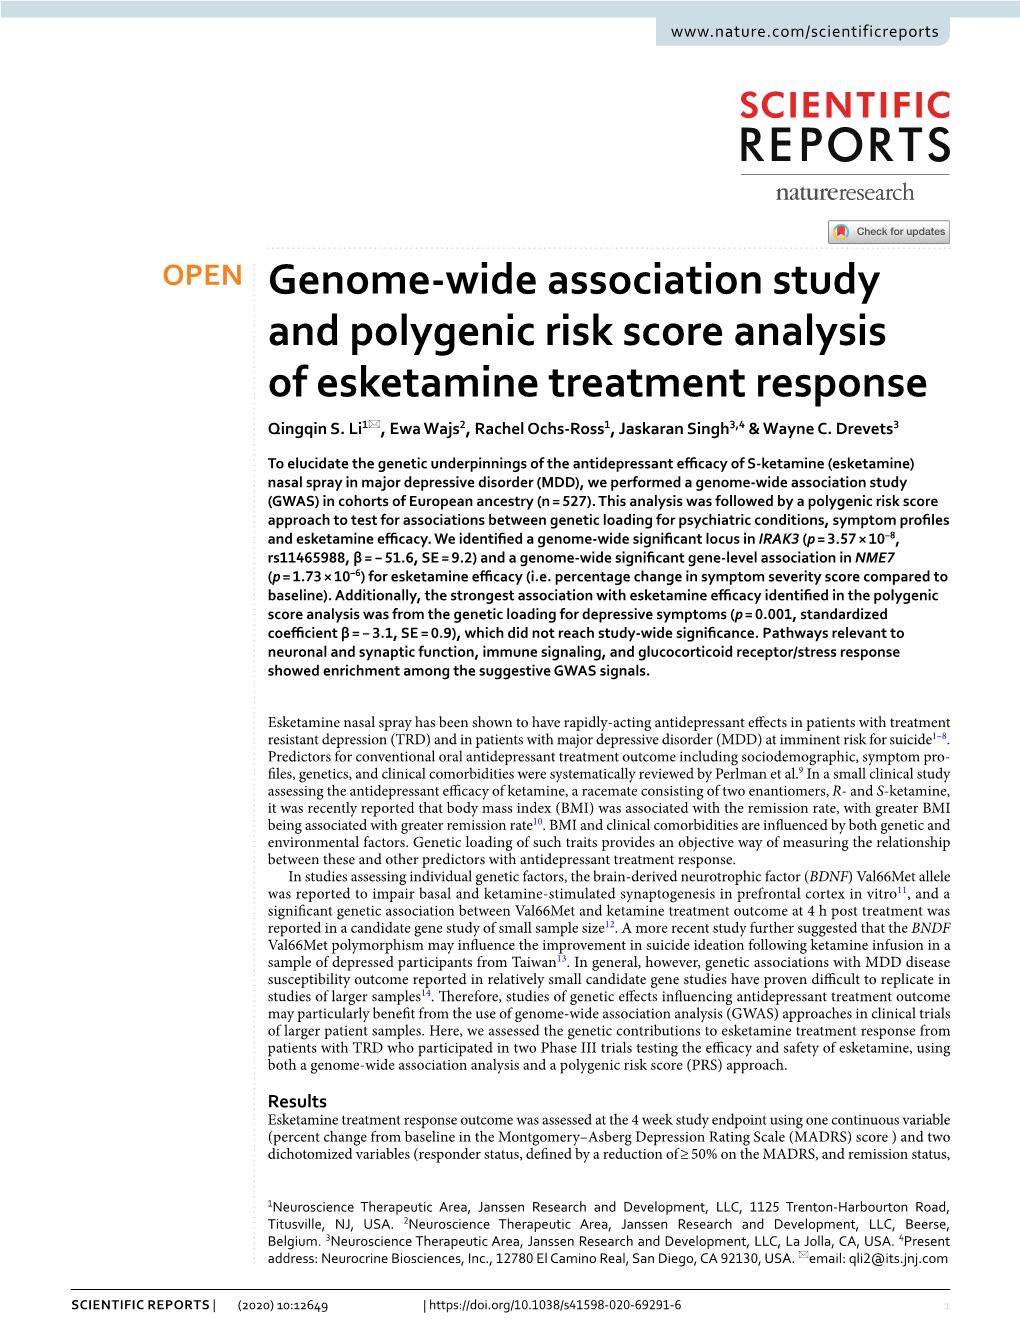 Genome-Wide Association Study and Polygenic Risk Score Analysis Of